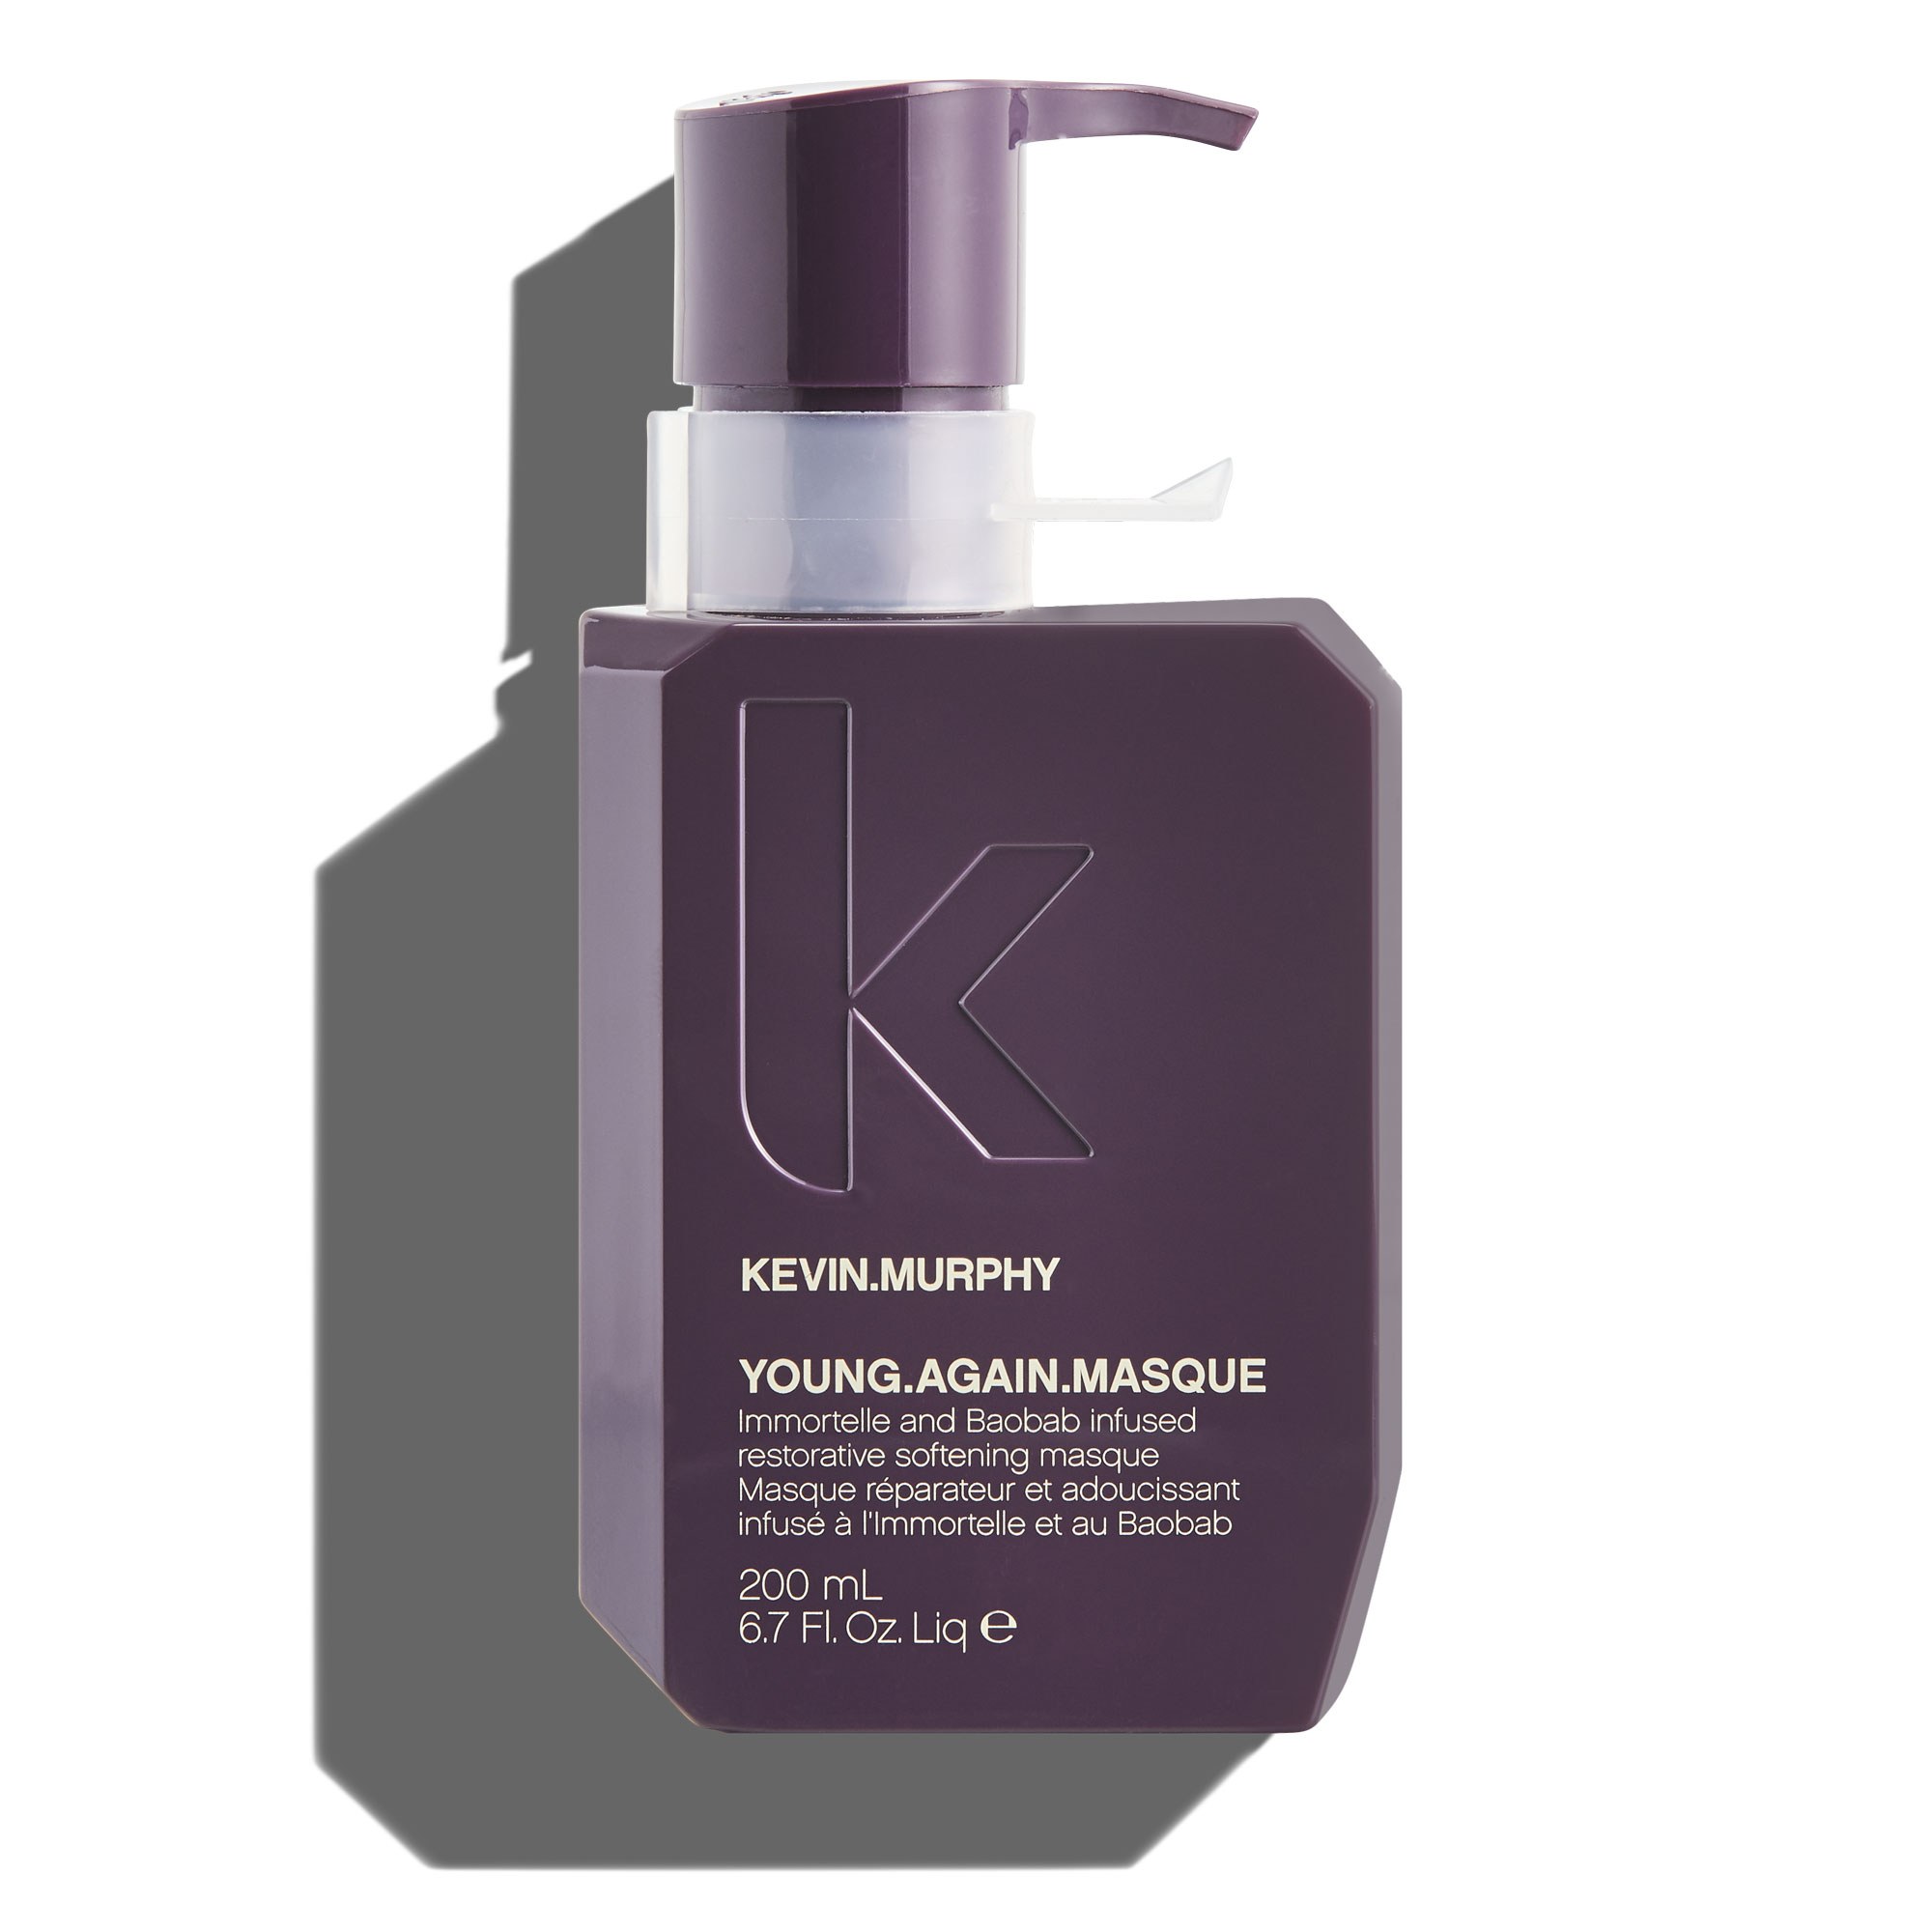 KEVIN.MURPHY YOUNG.AGAIN MASQUE 6.7oz